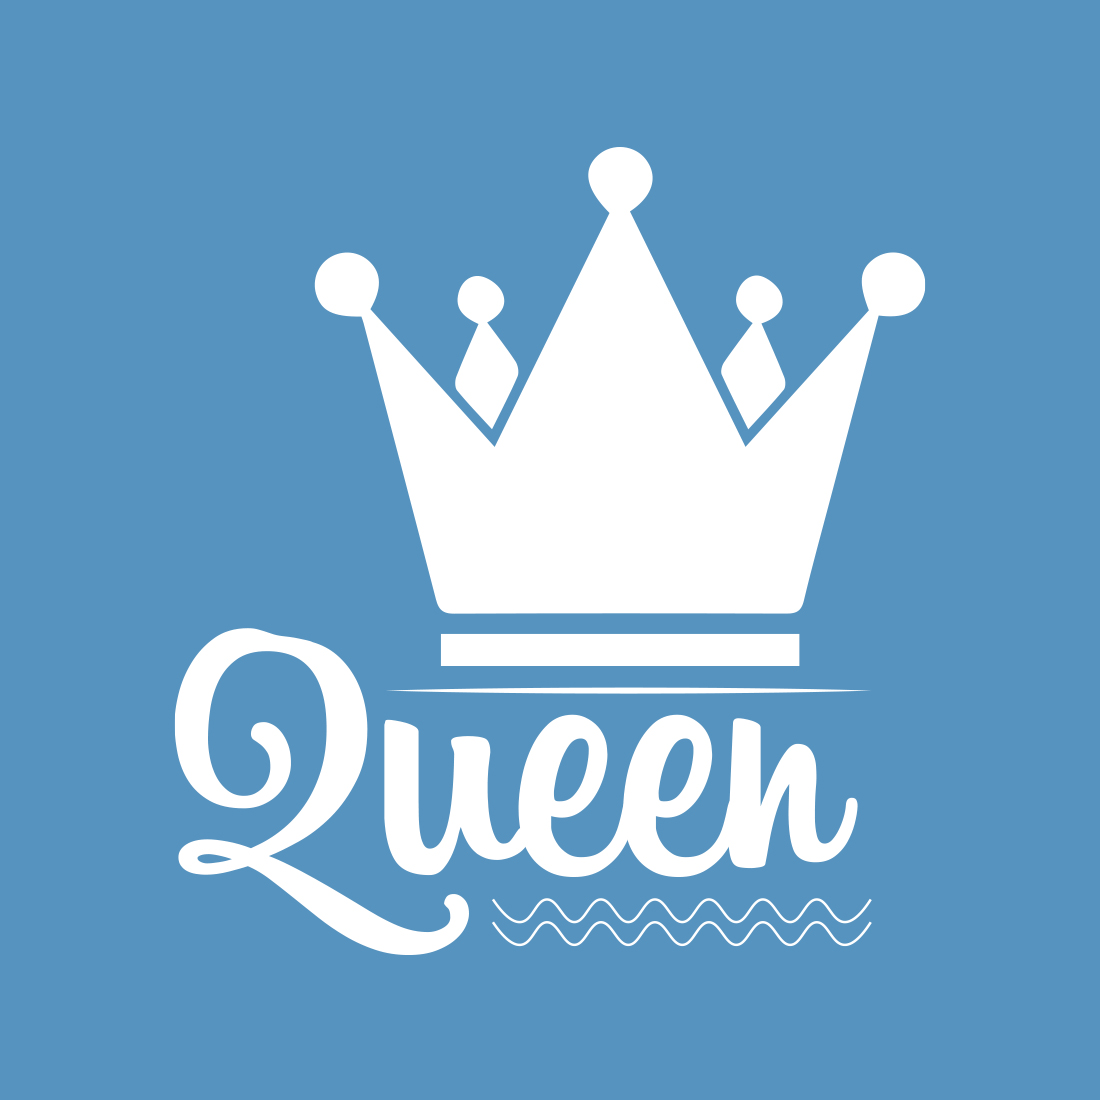 Wonderful image of the queens crown on a blue background